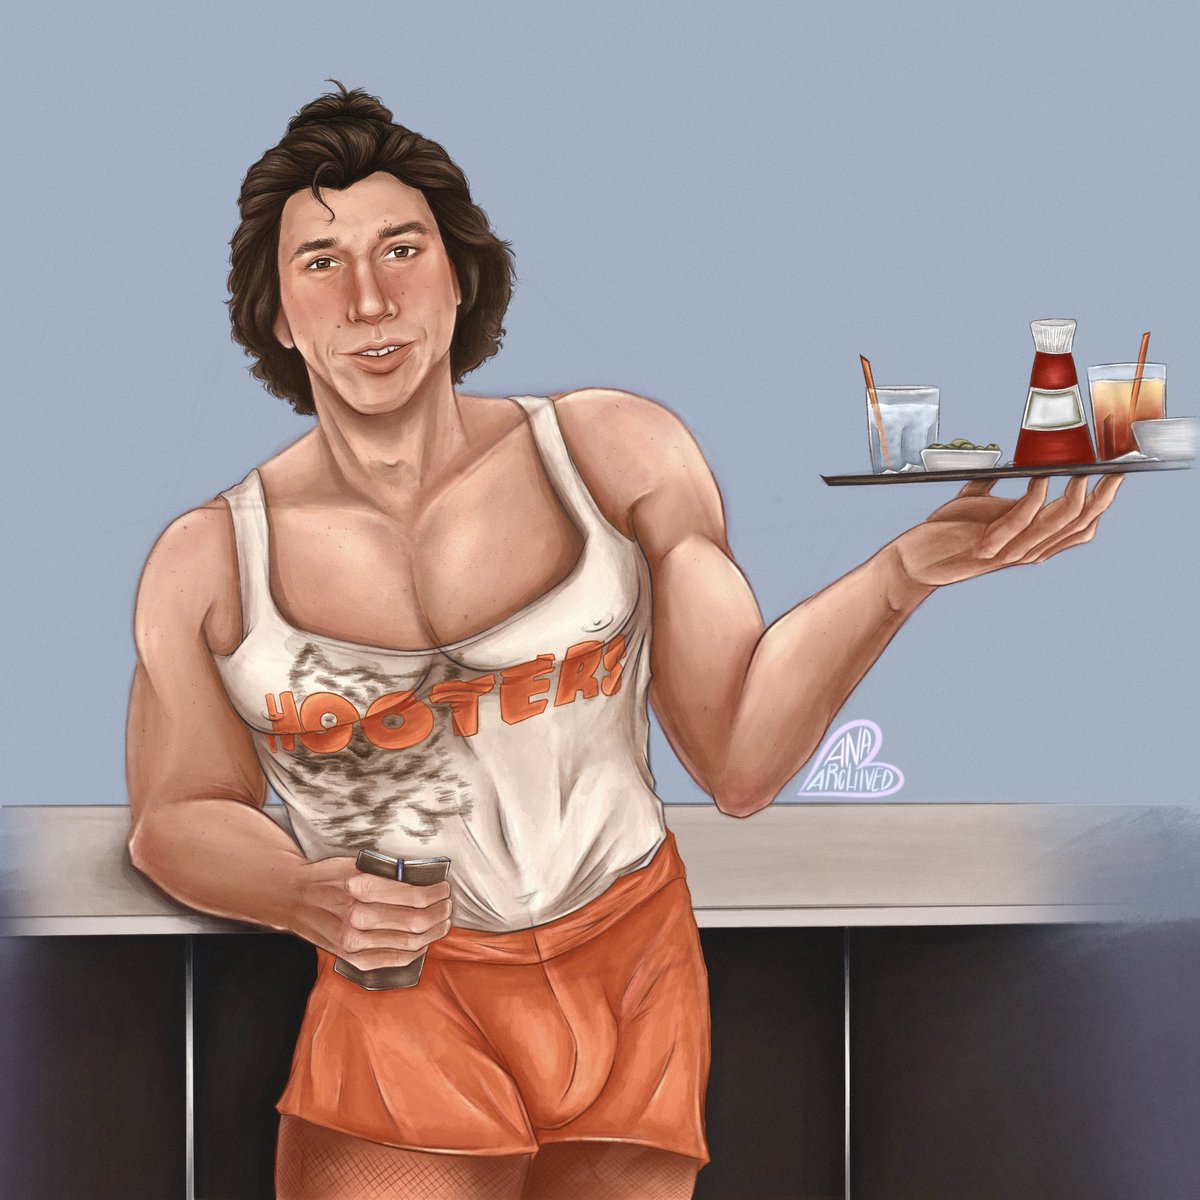 ben was looking for a little extra cash so he picked up a part time job at his local hooter’s on the weekends <3

#BenSolo #KyloRen #AdamDriver #StarWars #sequeltrilogy #AnaArchivedArt #tfa #tlj #tros #myart #fanart #myfanart #procreate